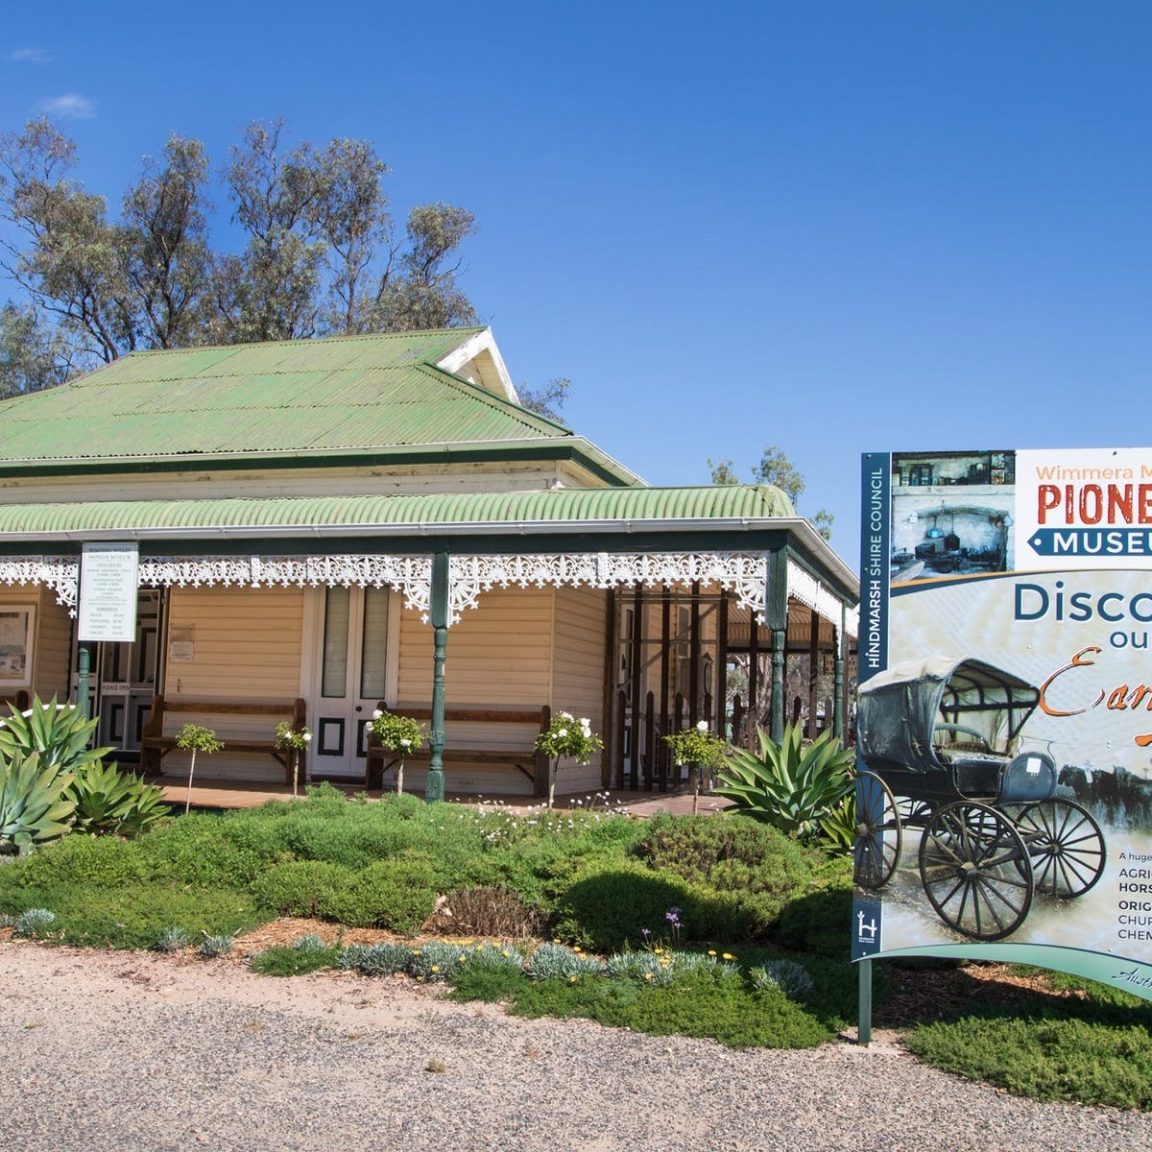 Wimmera Mallee Pioneer Museum front entrance. Homestead with garden and interpretive signs